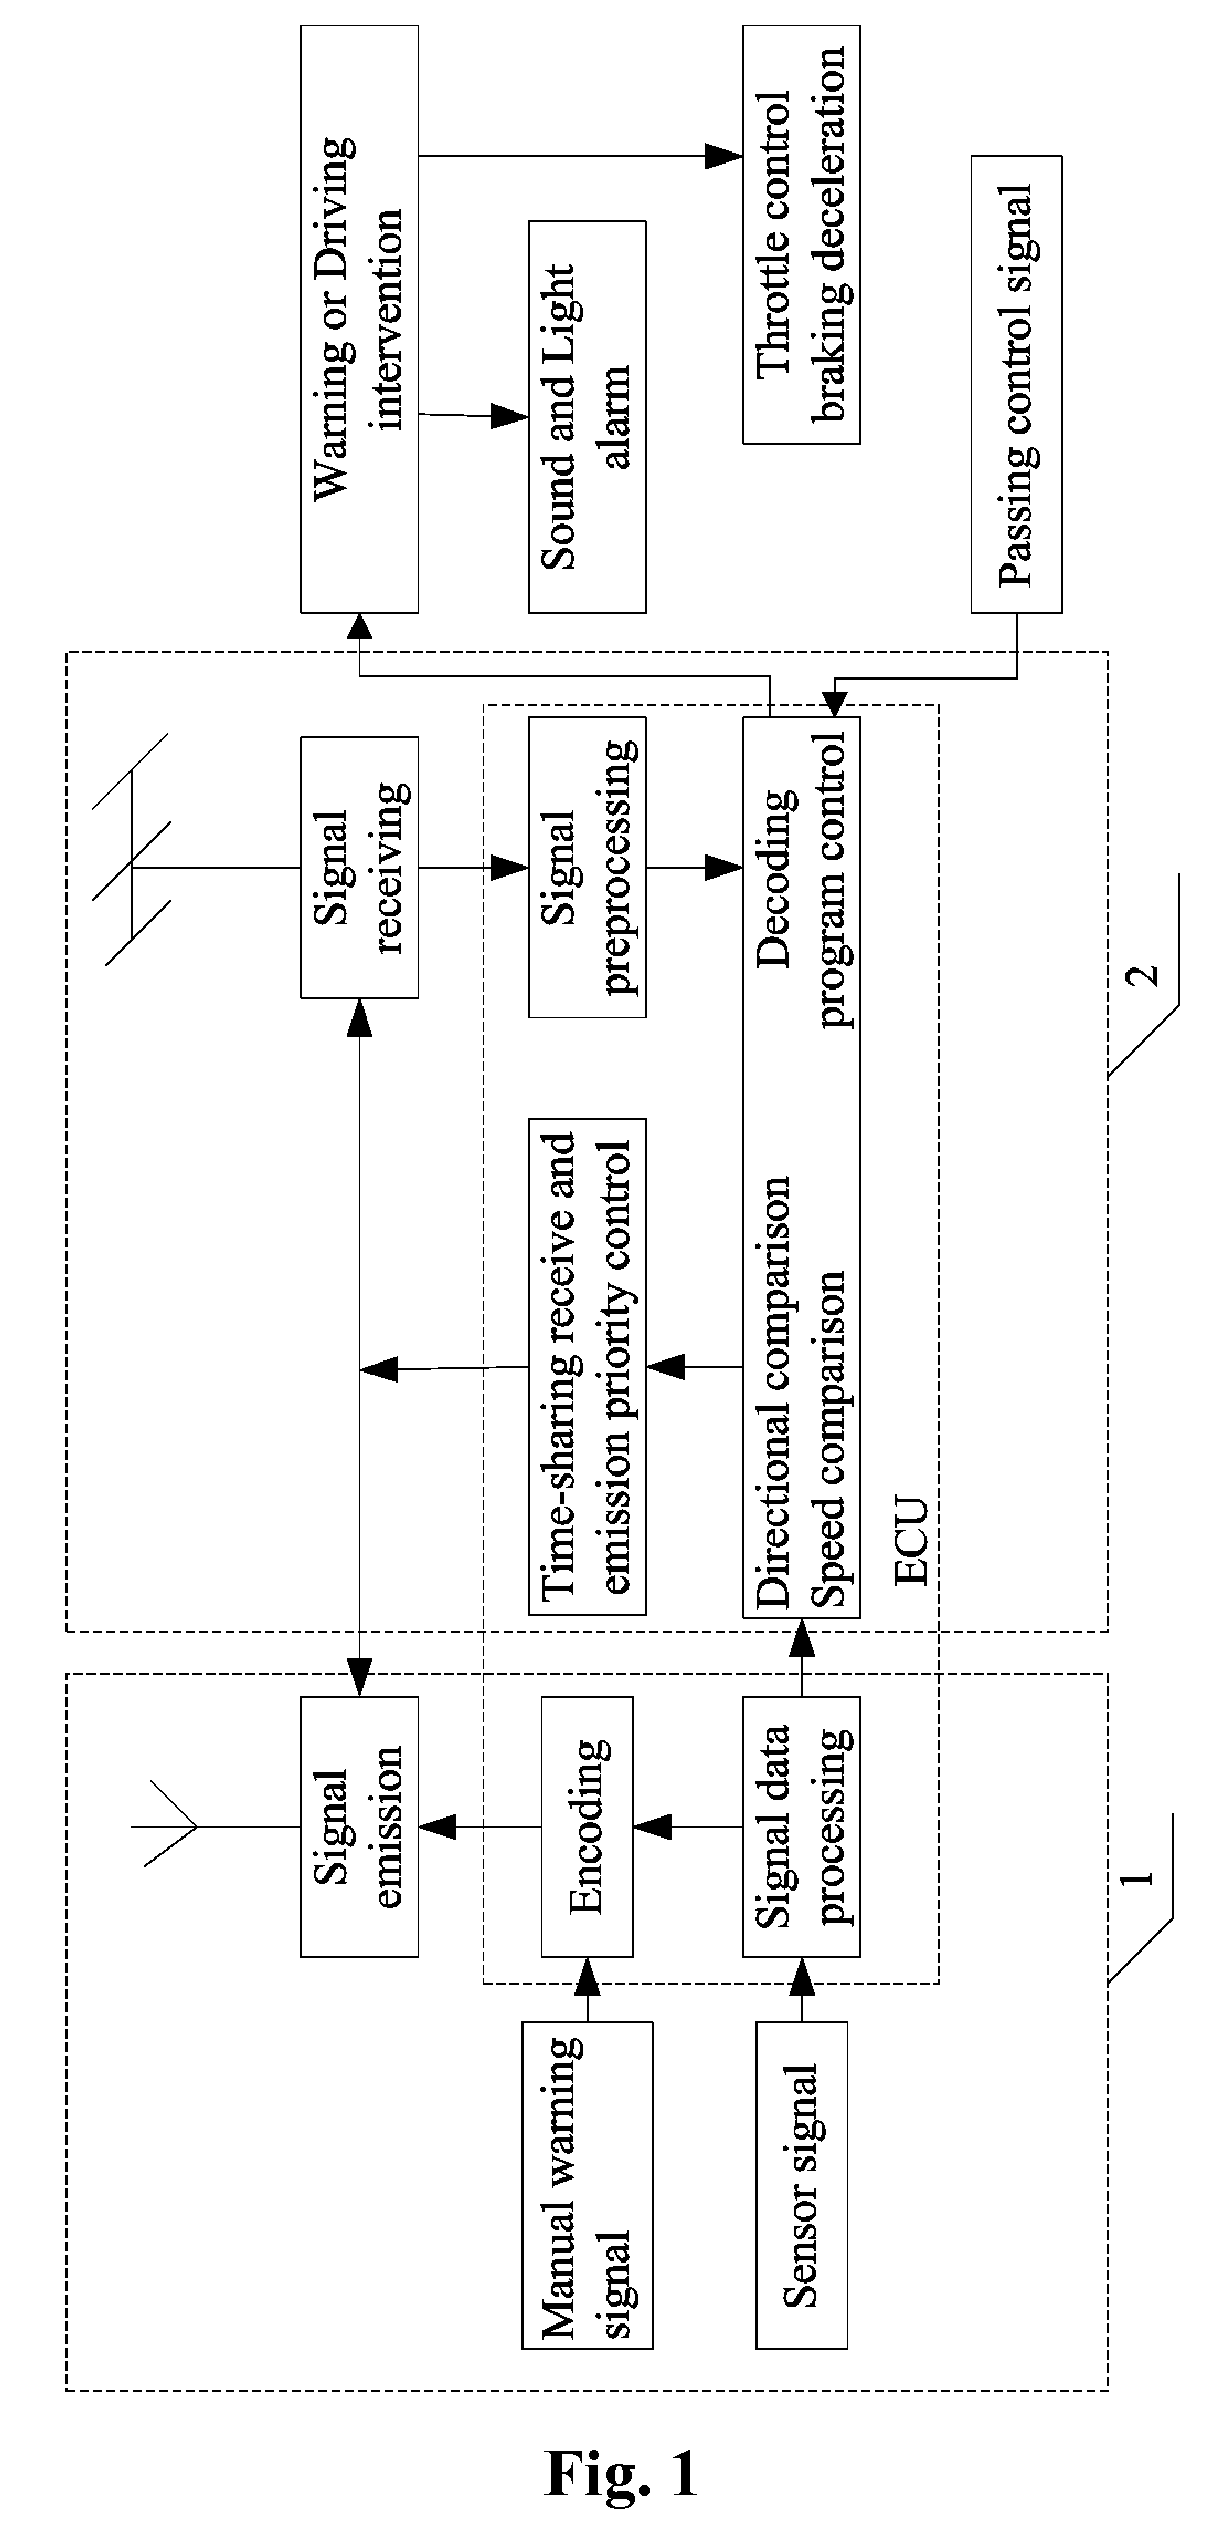 Apparatus and method for warning and prevention of vehicle collisions